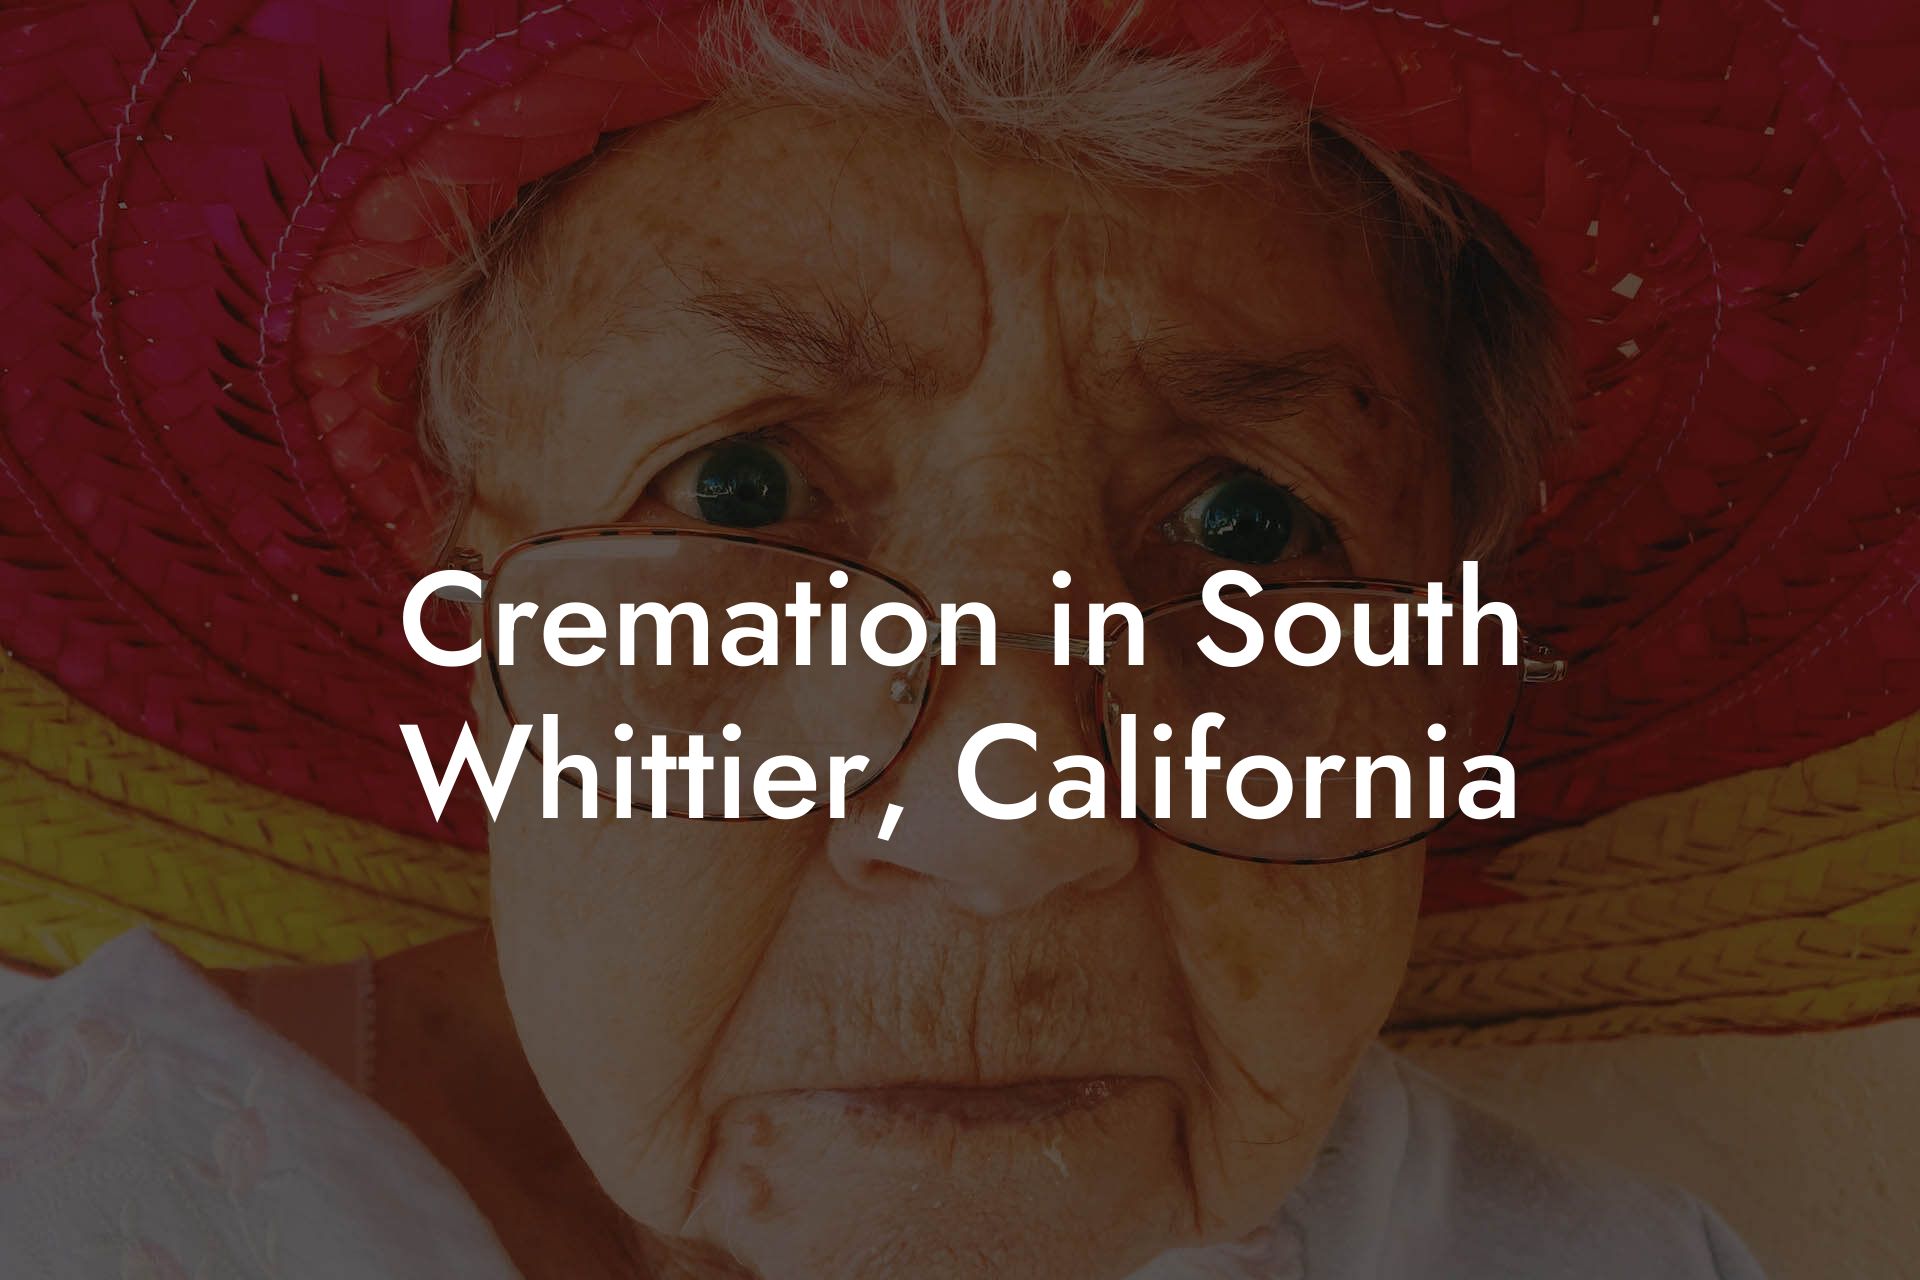 Cremation in South Whittier, California